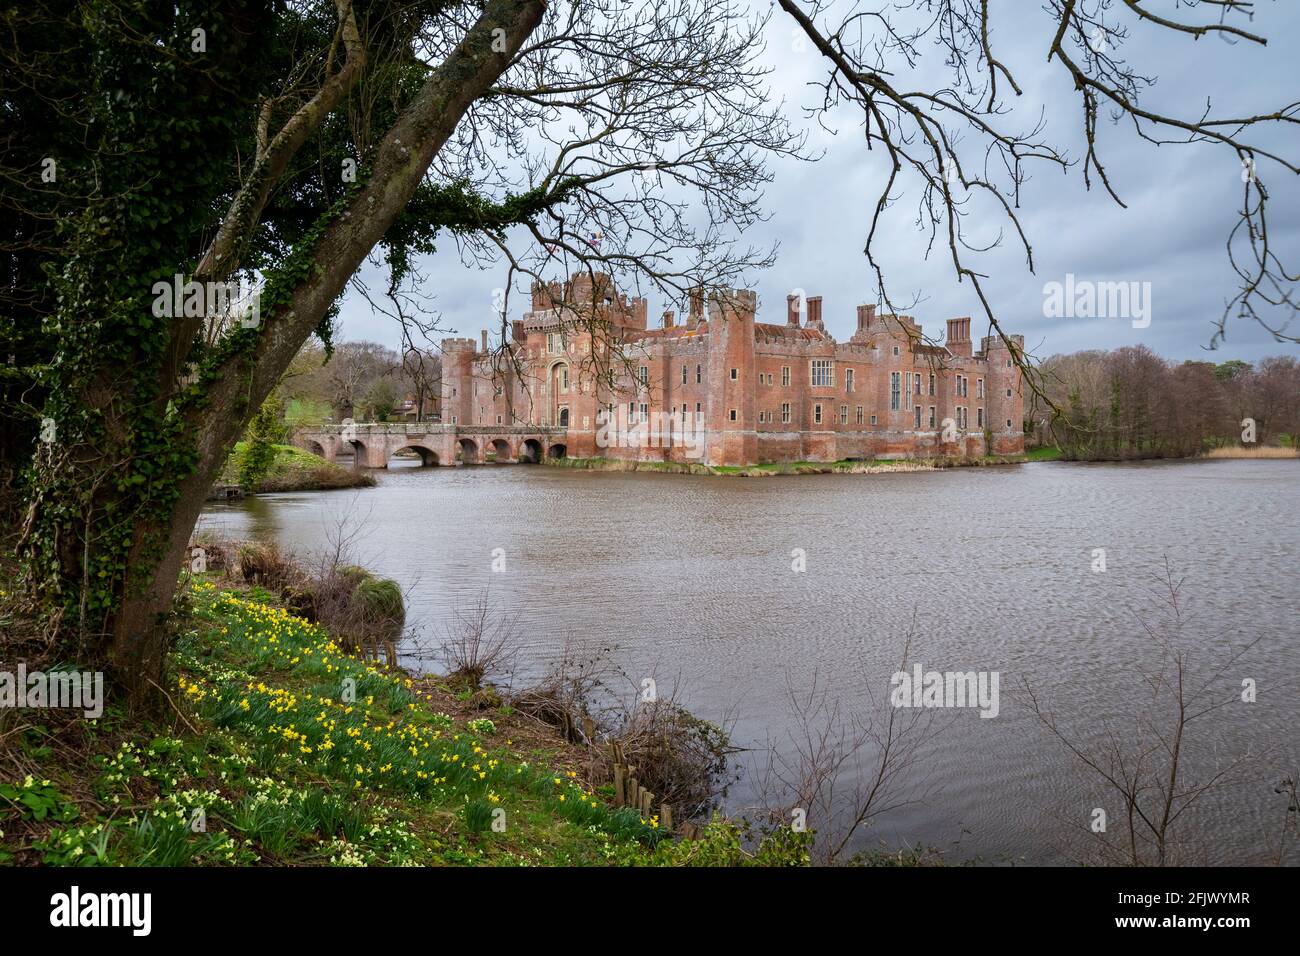 View of the Herstmonceux castle, Herstmonceux, East Sussex, southern England, United Kingdom. Stock Photo